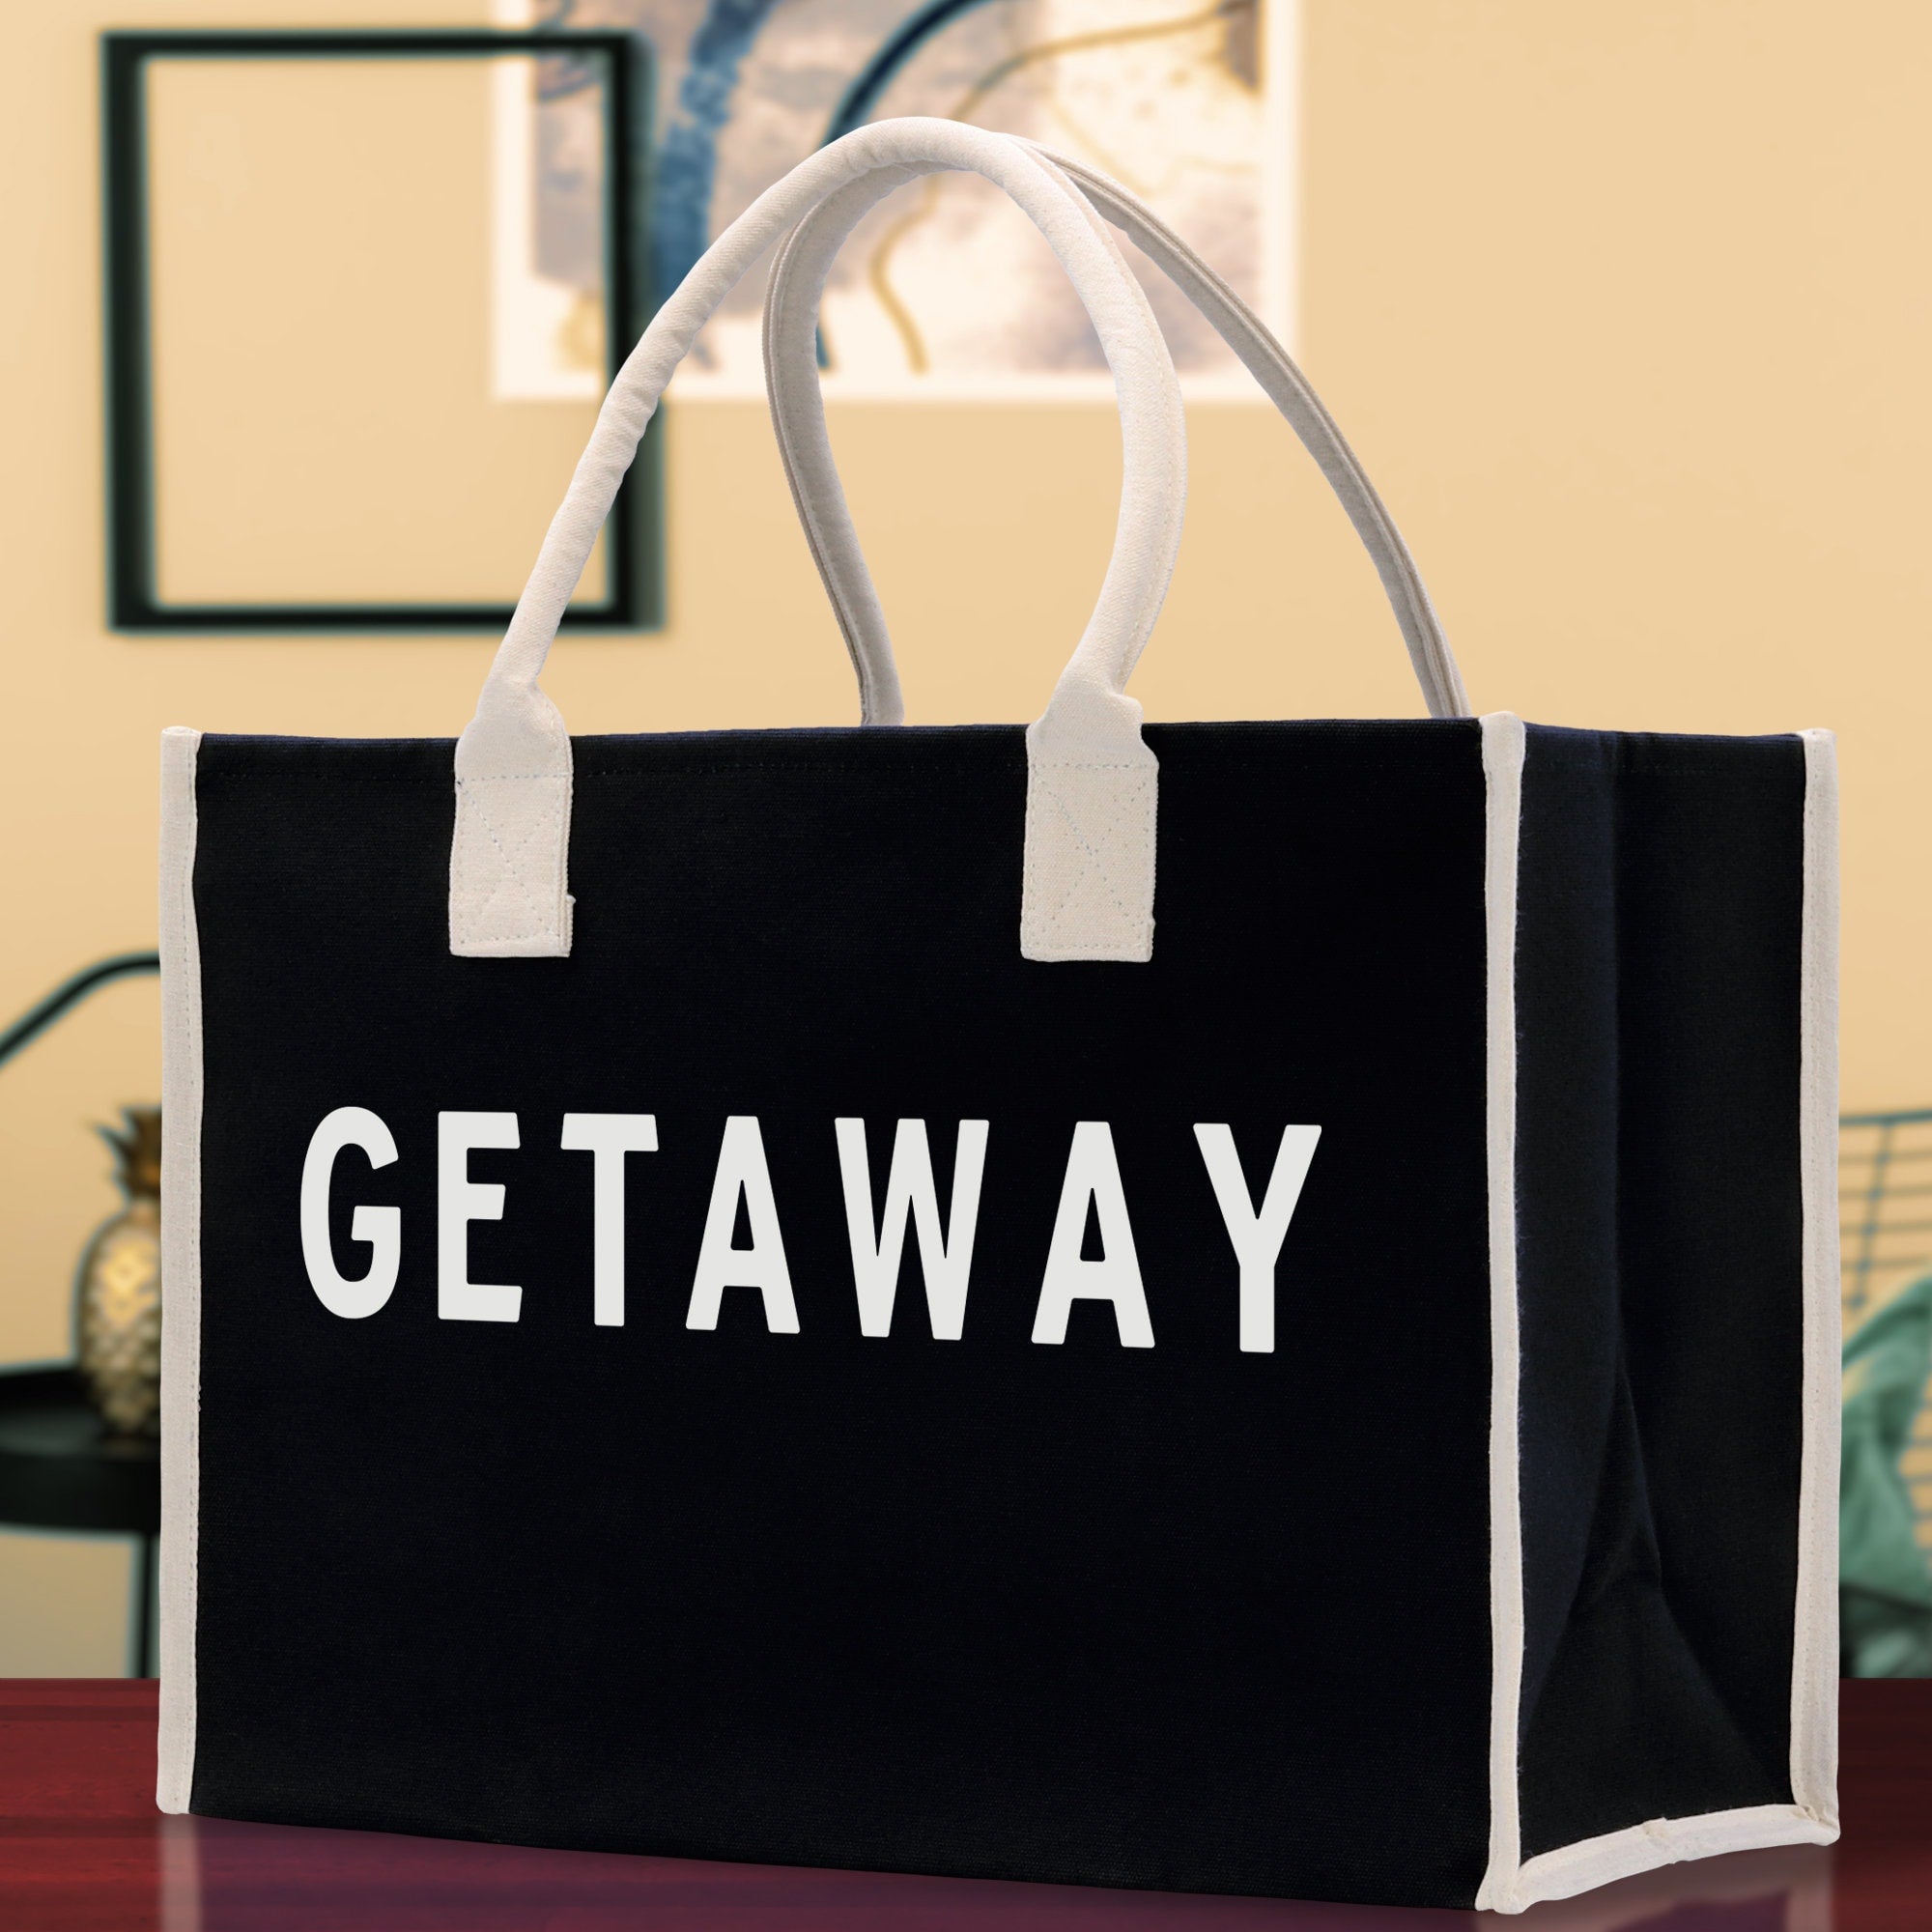 Getaway Cotton Canvas Chic Beach Tote Bag Multipurpose Tote Weekender Tote Gift for Her Outdoor Tote Vacation Tote Large Beach Bag